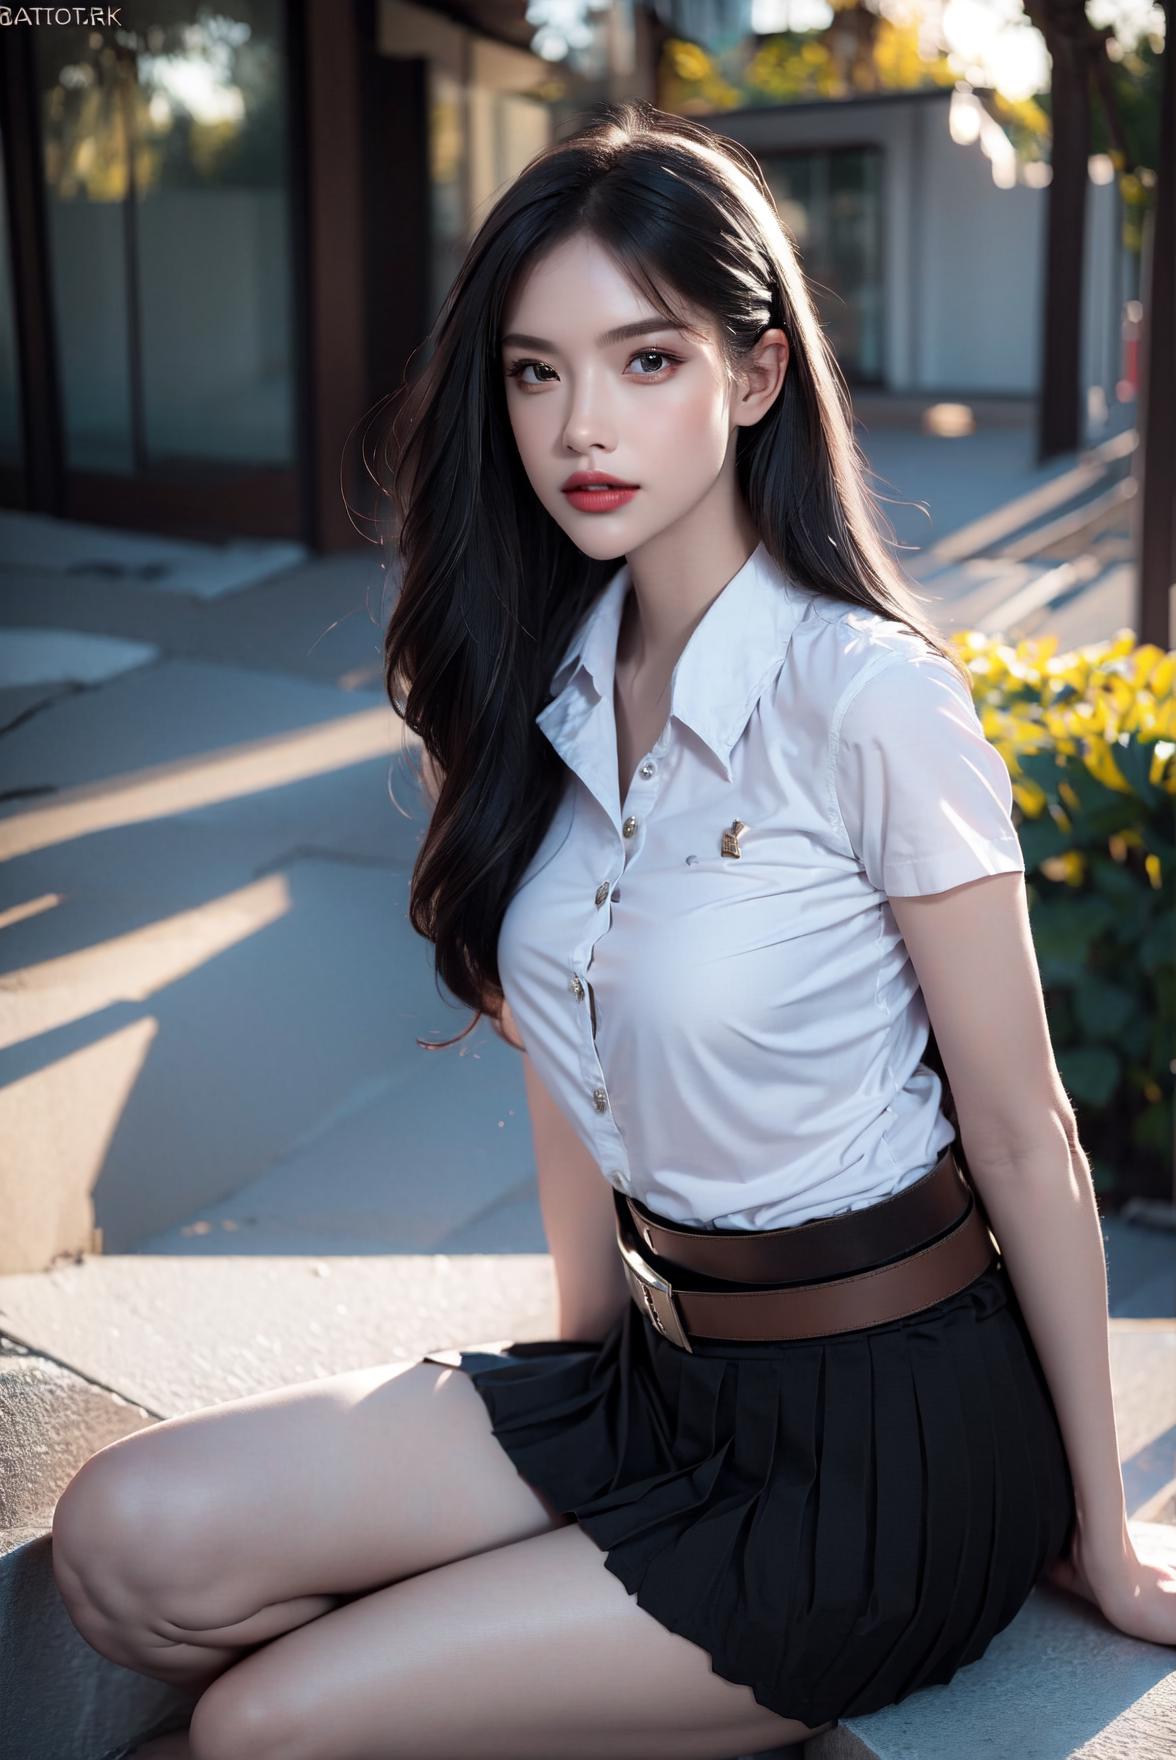 A young Asian woman wearing a white shirt, brown belt, and black skirt poses for a picture.